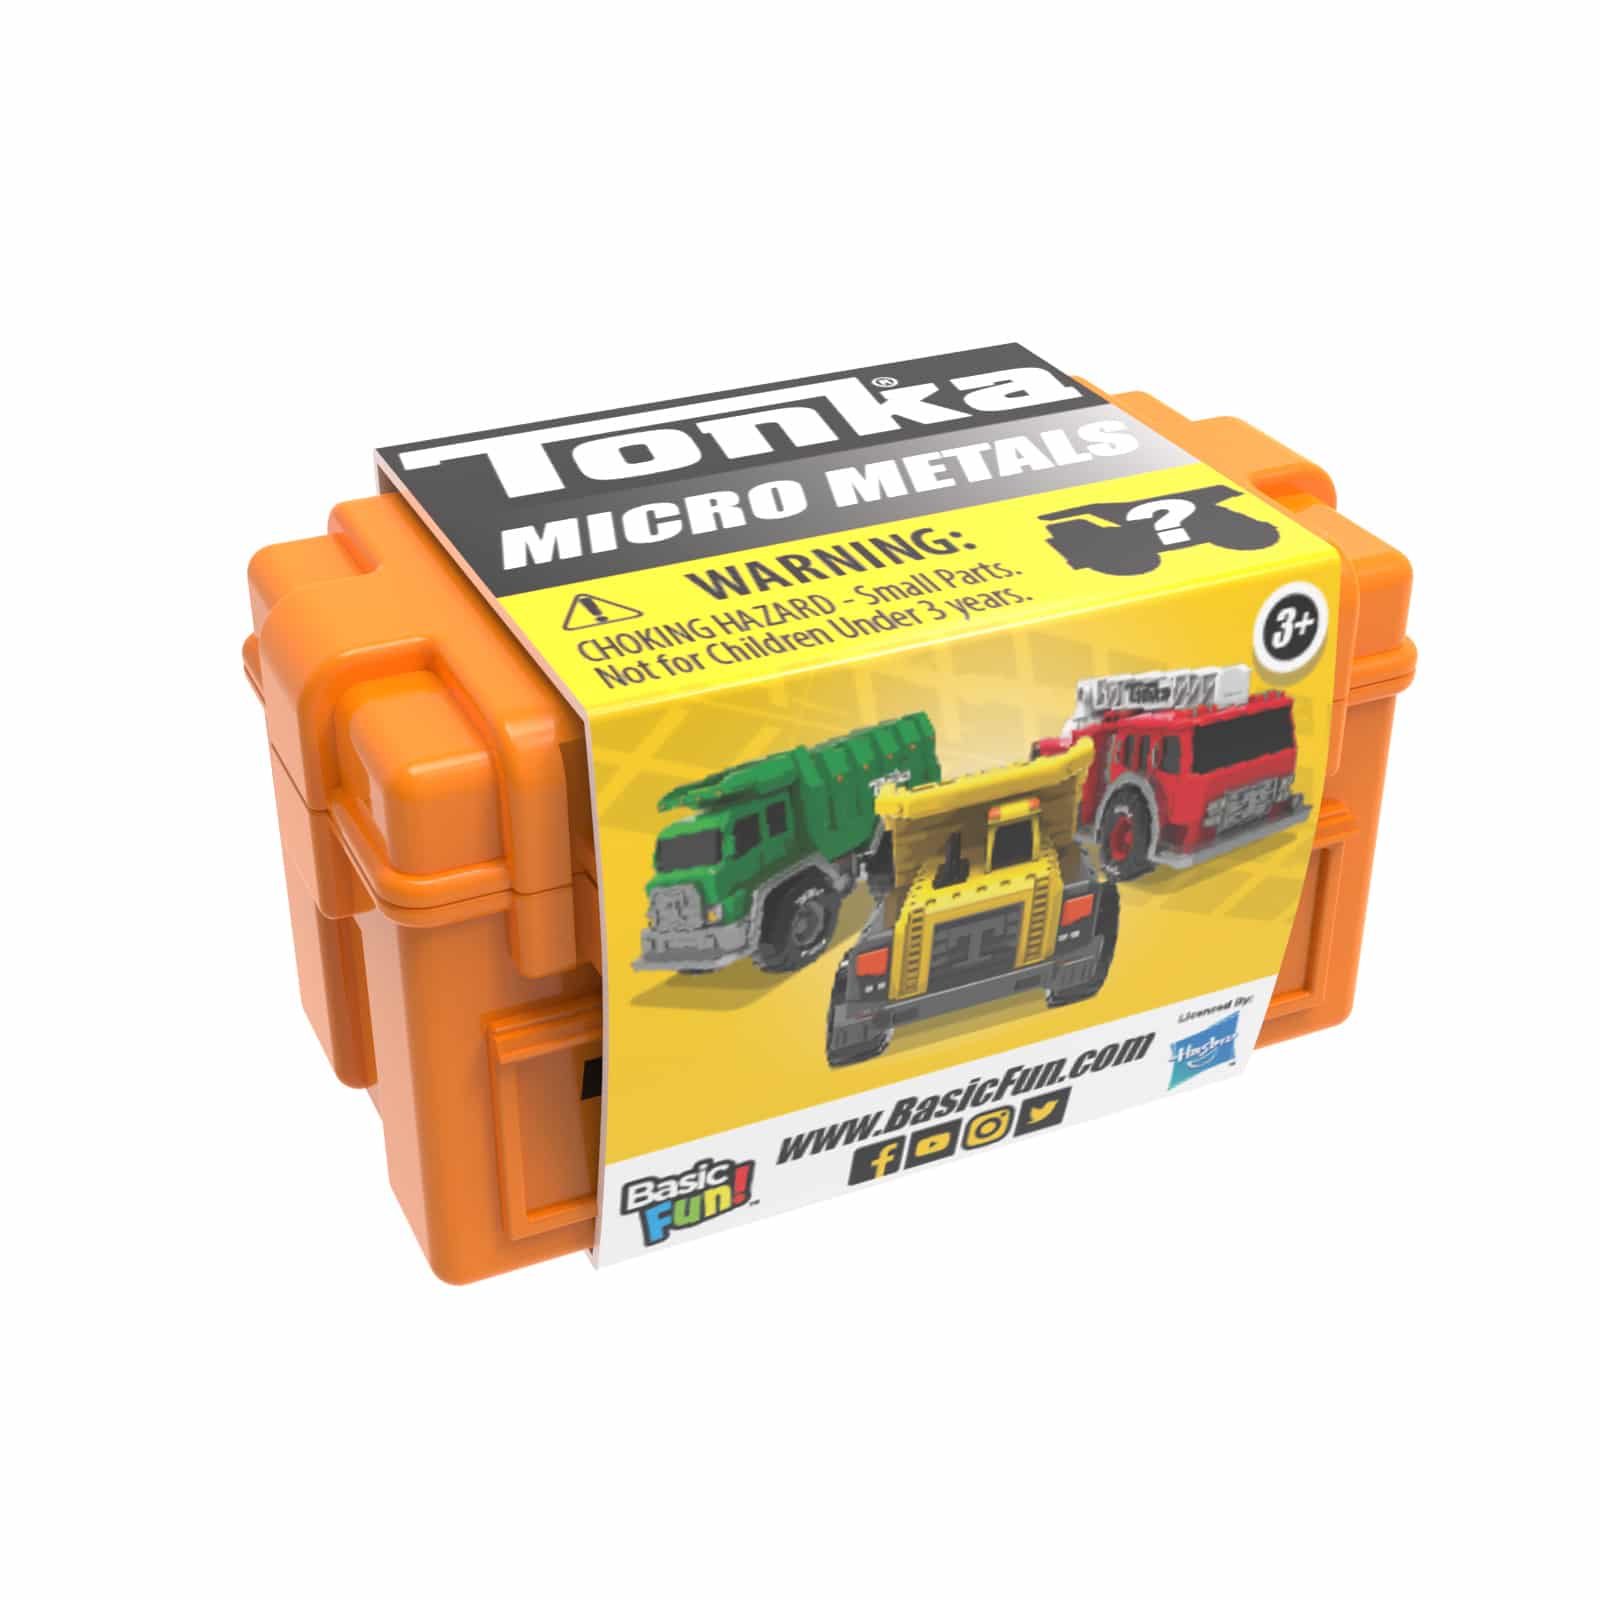 Tonka Micro Sized Metal Truck Assortment by Schylling #6040